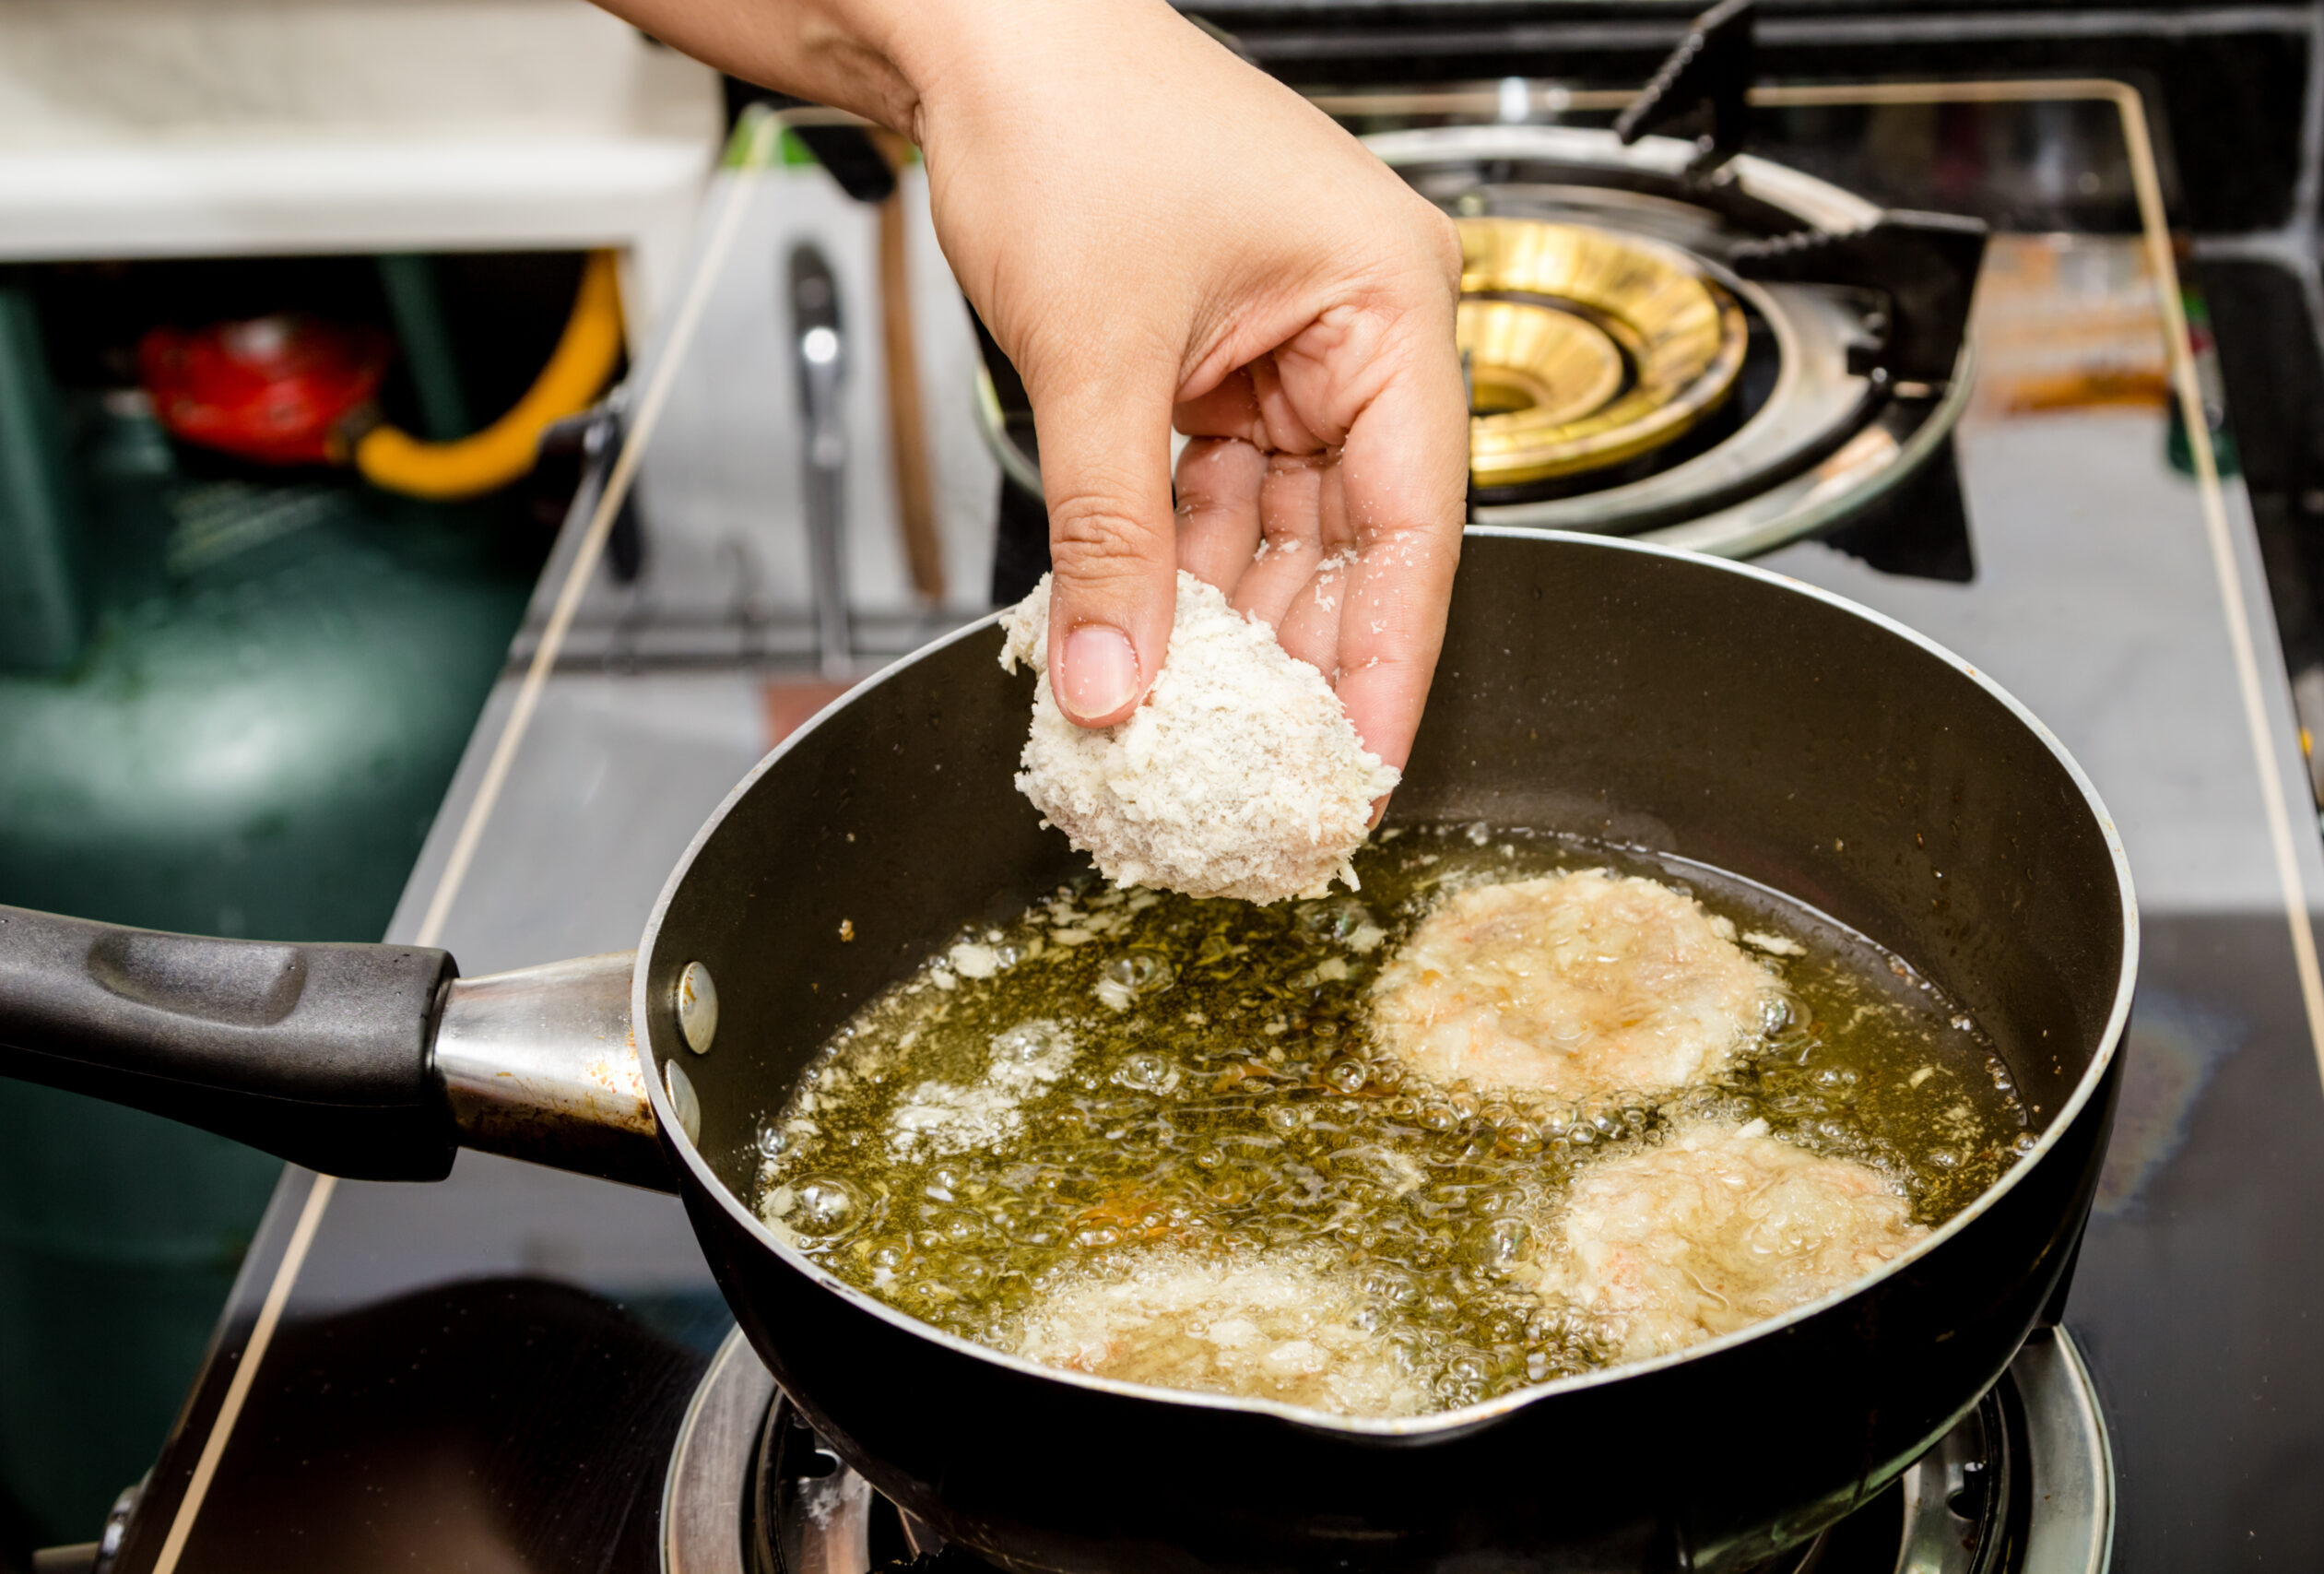 KUOW - How do you know if your oil is hot enough to deep fry? Use your ears